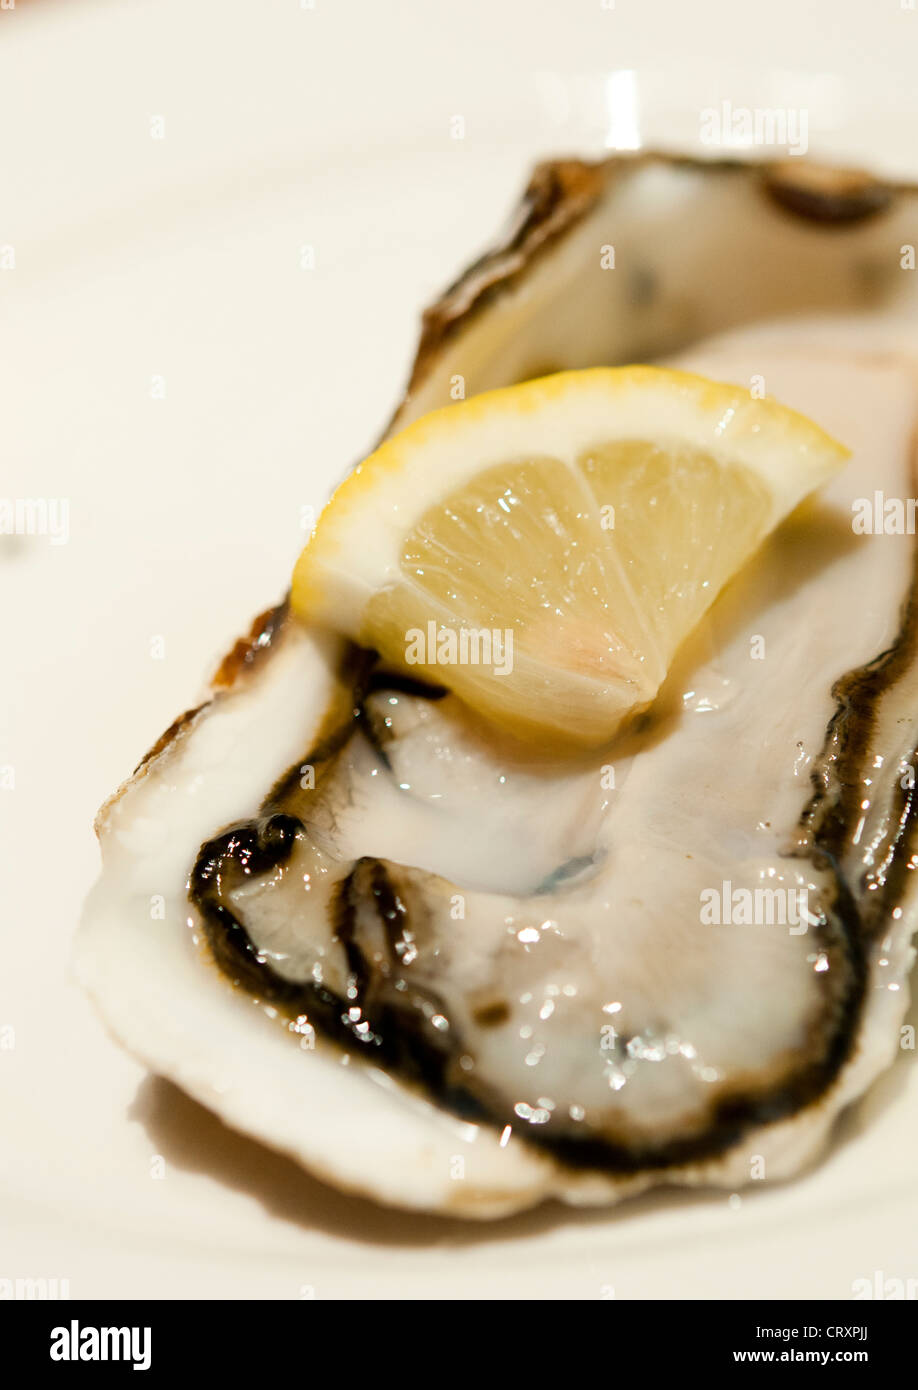 close up zoom of edible live oysters Stock Photo